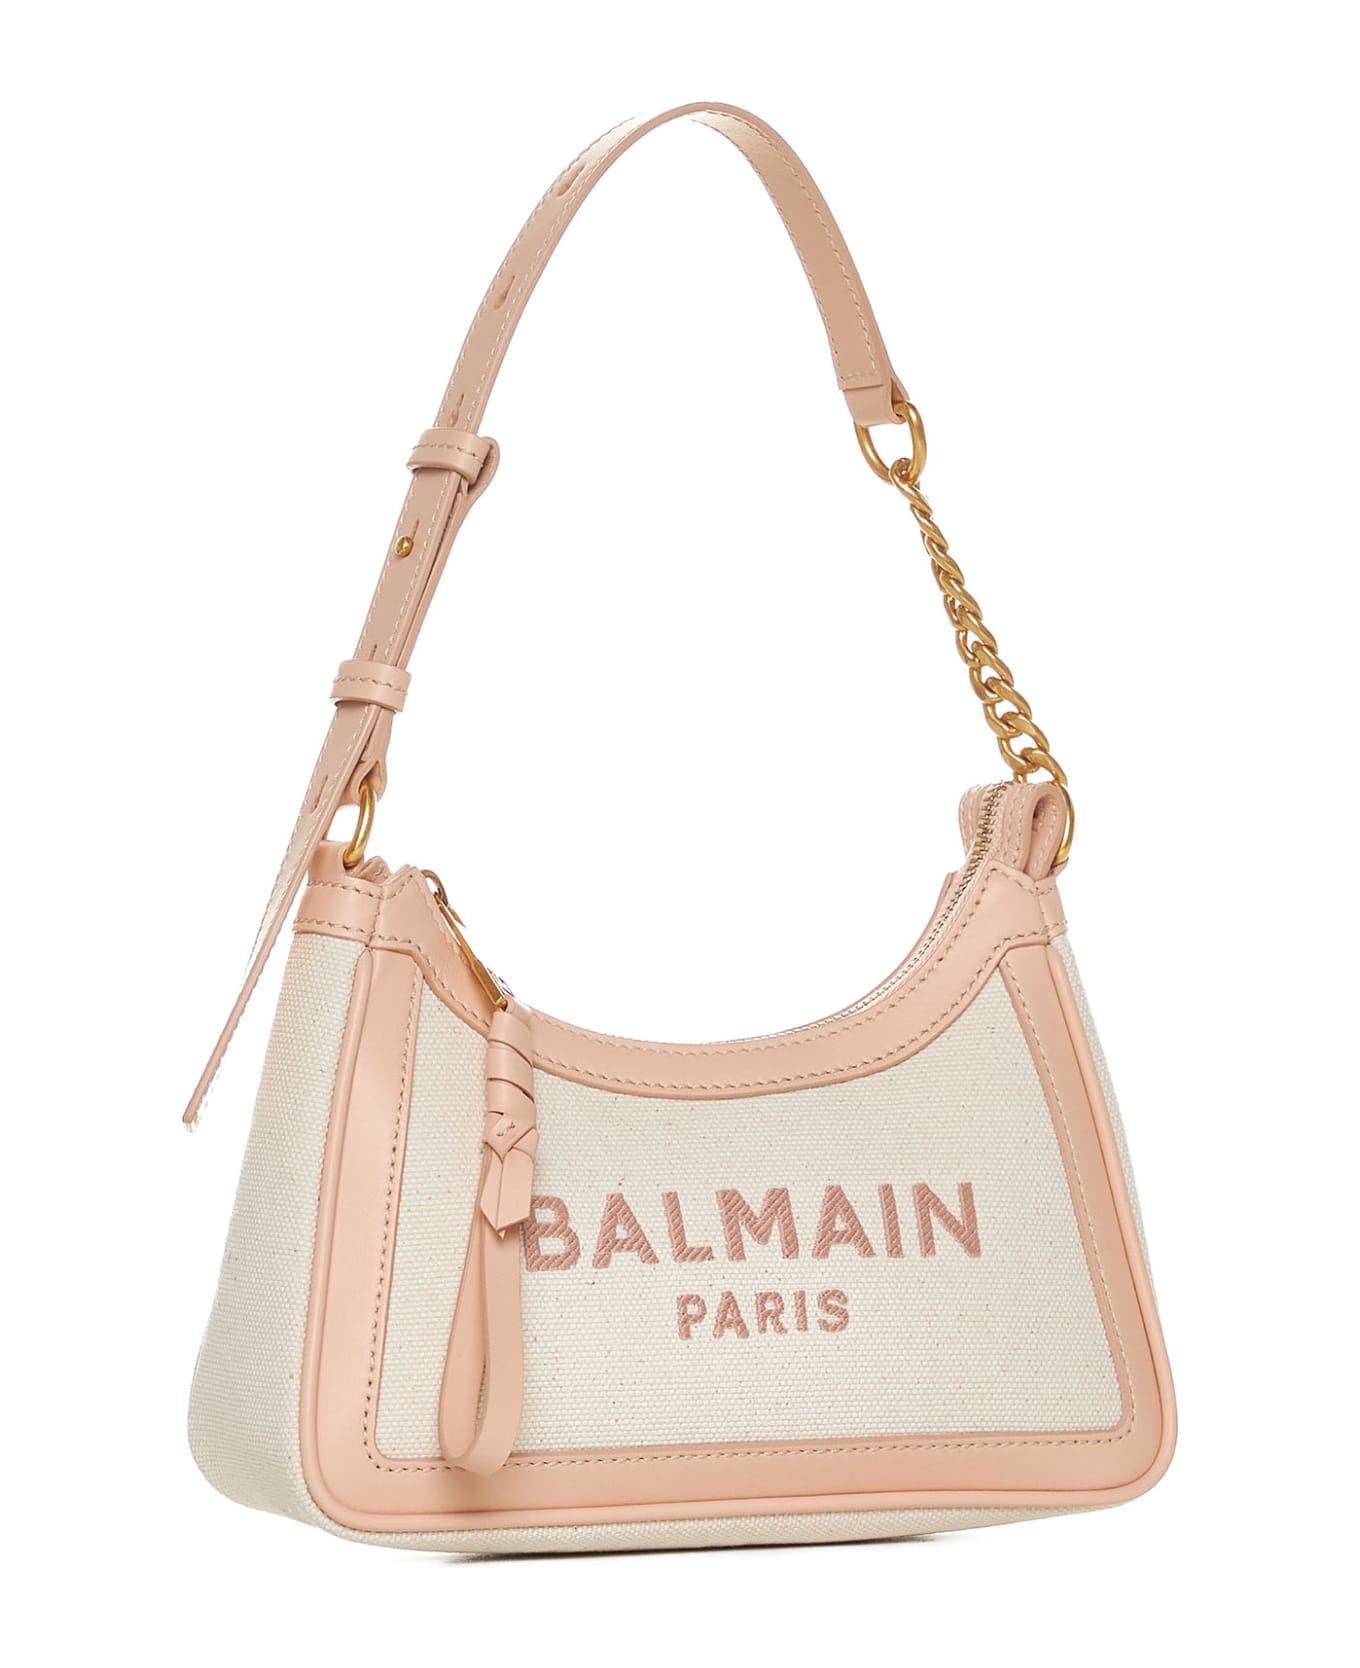 Balmain B-army 26 Bag In Canvas And Leather - Cream